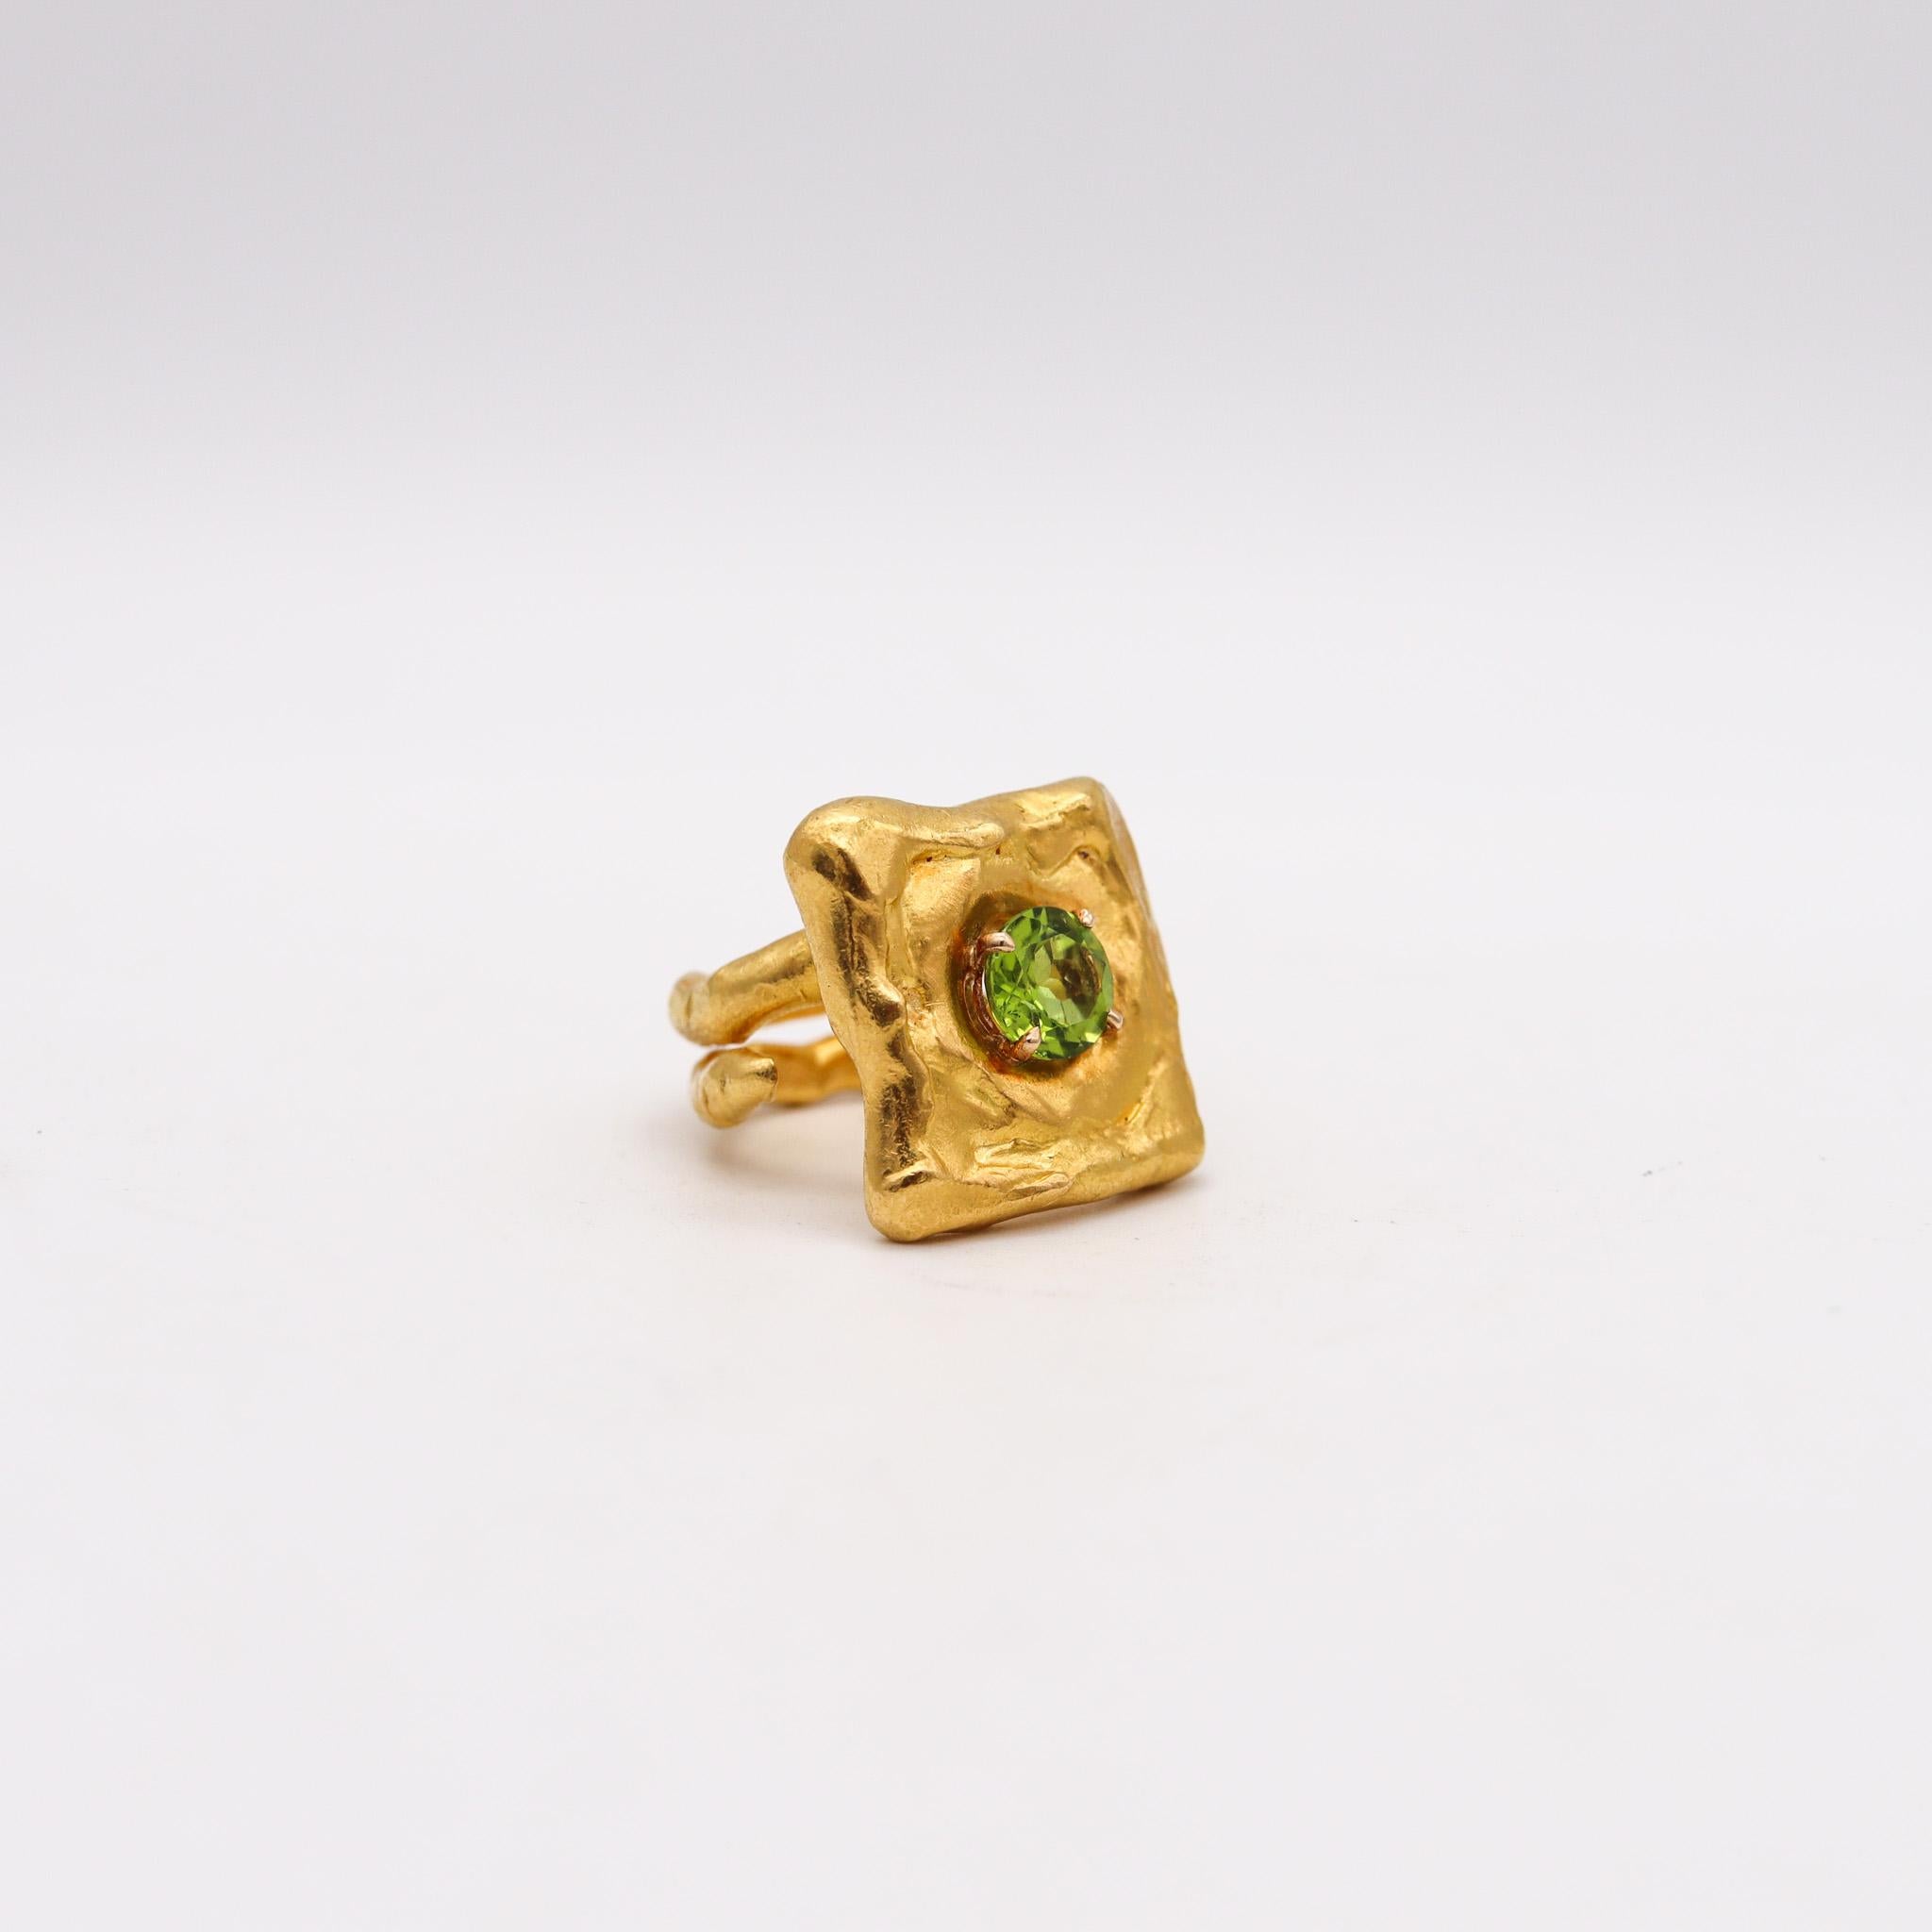 Round Cut Jean Mahie Paris Rare Sculptural Cocktail Ring In 22Kt Yellow Gold With Peridot For Sale